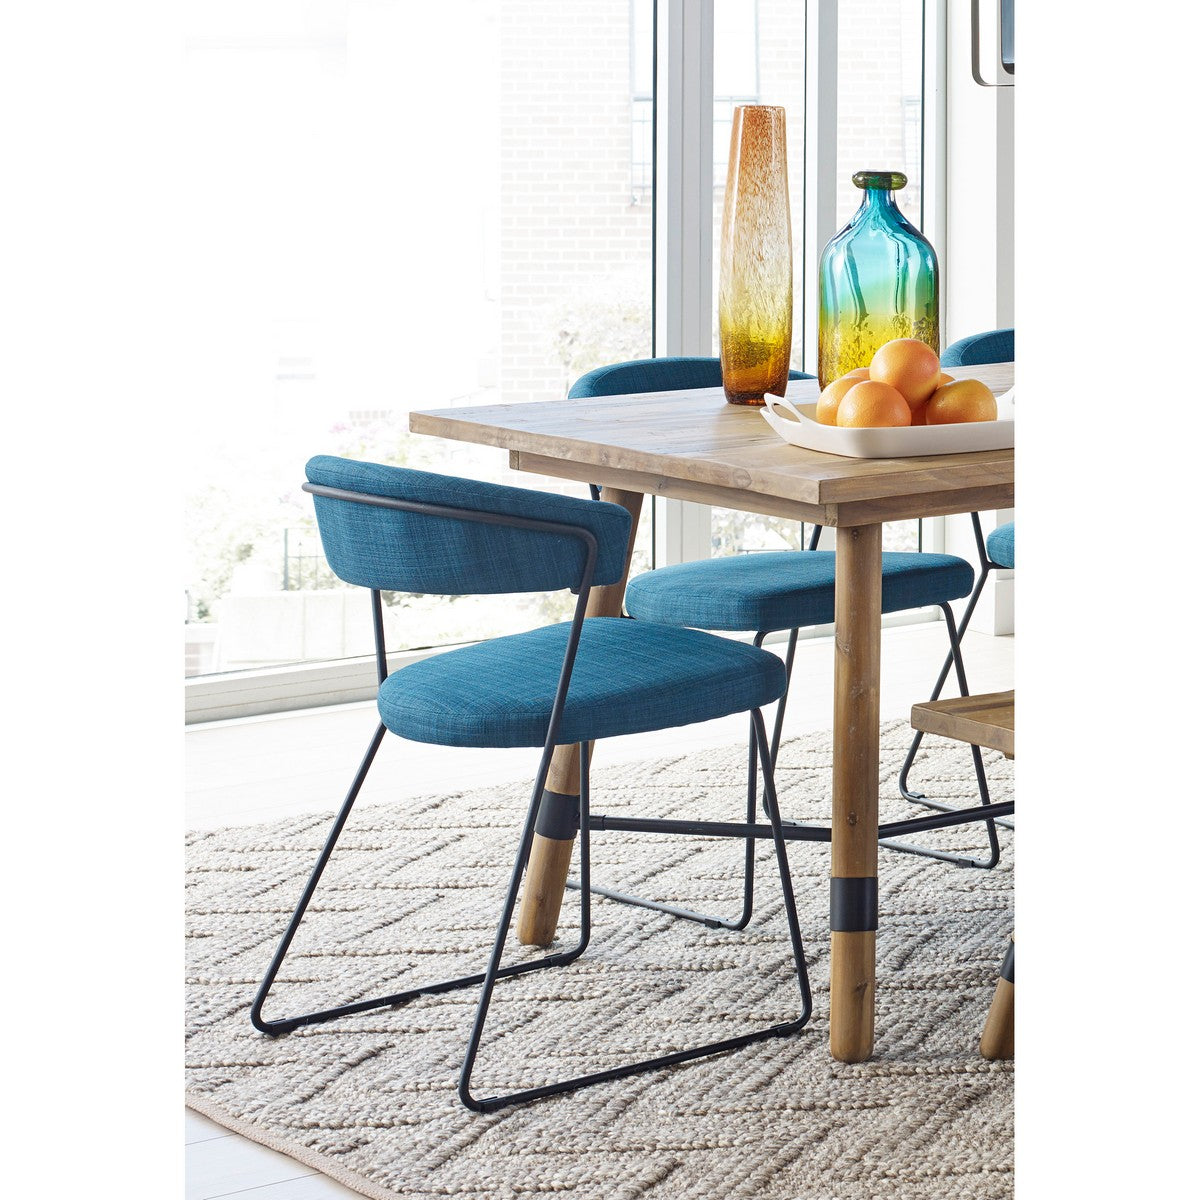 Moe's Home Collection Adria Dining Chair Blue-Set of Two - HK-1010-50 - Moe's Home Collection - Dining Chairs - Minimal And Modern - 1